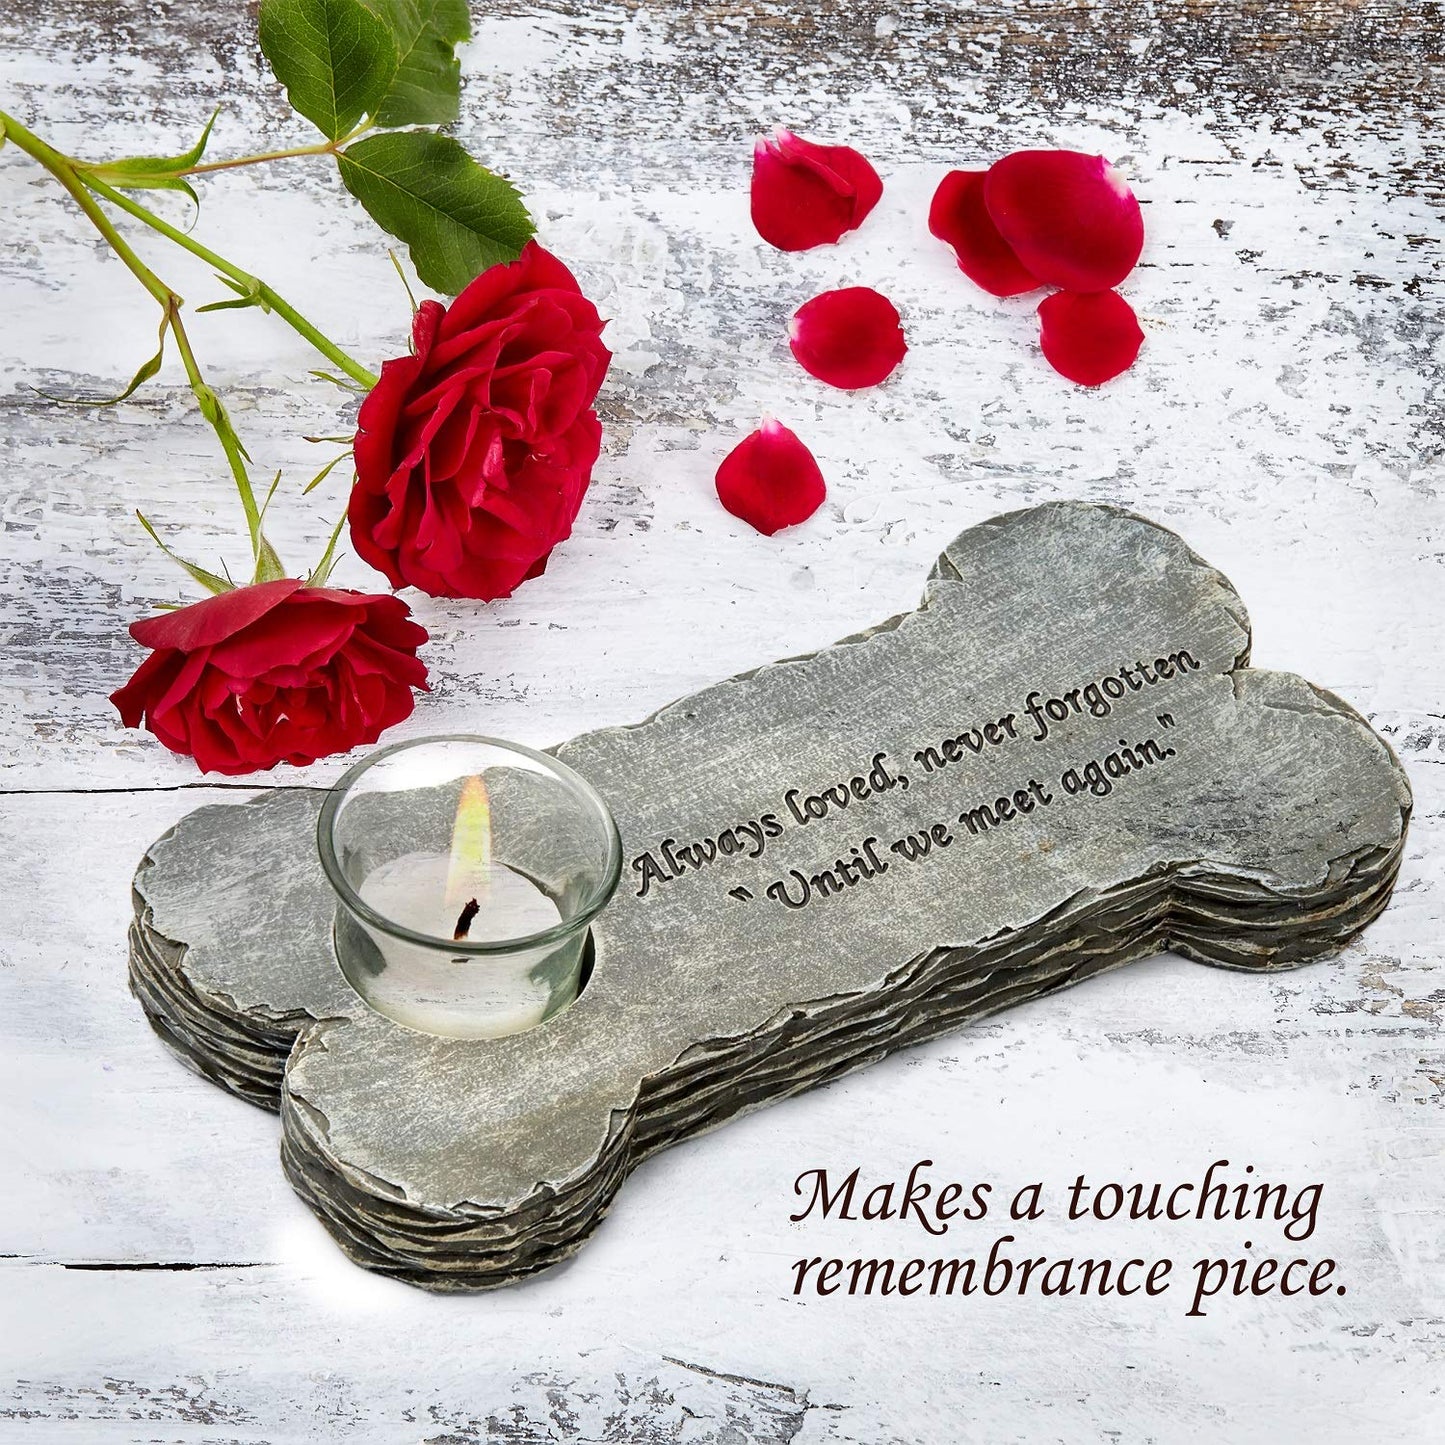 Dog Memorial Candle, Beautifully Packaged Dog Remembrance Gift, in Memory of Dog. Rainbow Bridge Keepsake. Loss of Dog Gifts - Always Loved, Never Forgotten. Pet Loss Gifts Dog (Grey)